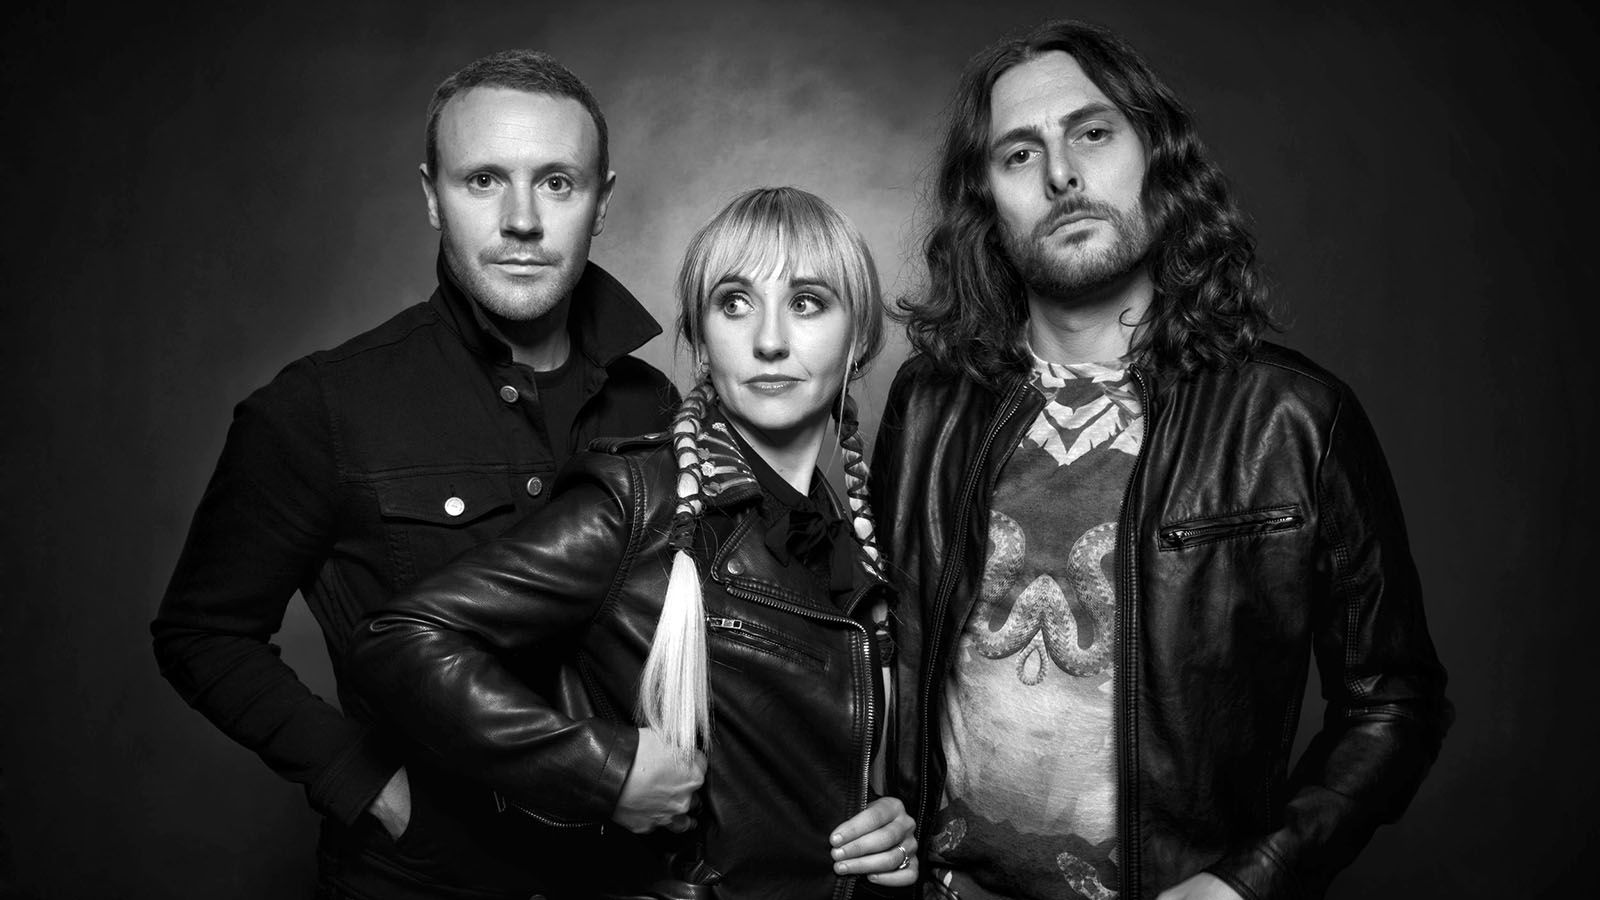 The Joy Formidable will perform Sept. 20 at Piere's.